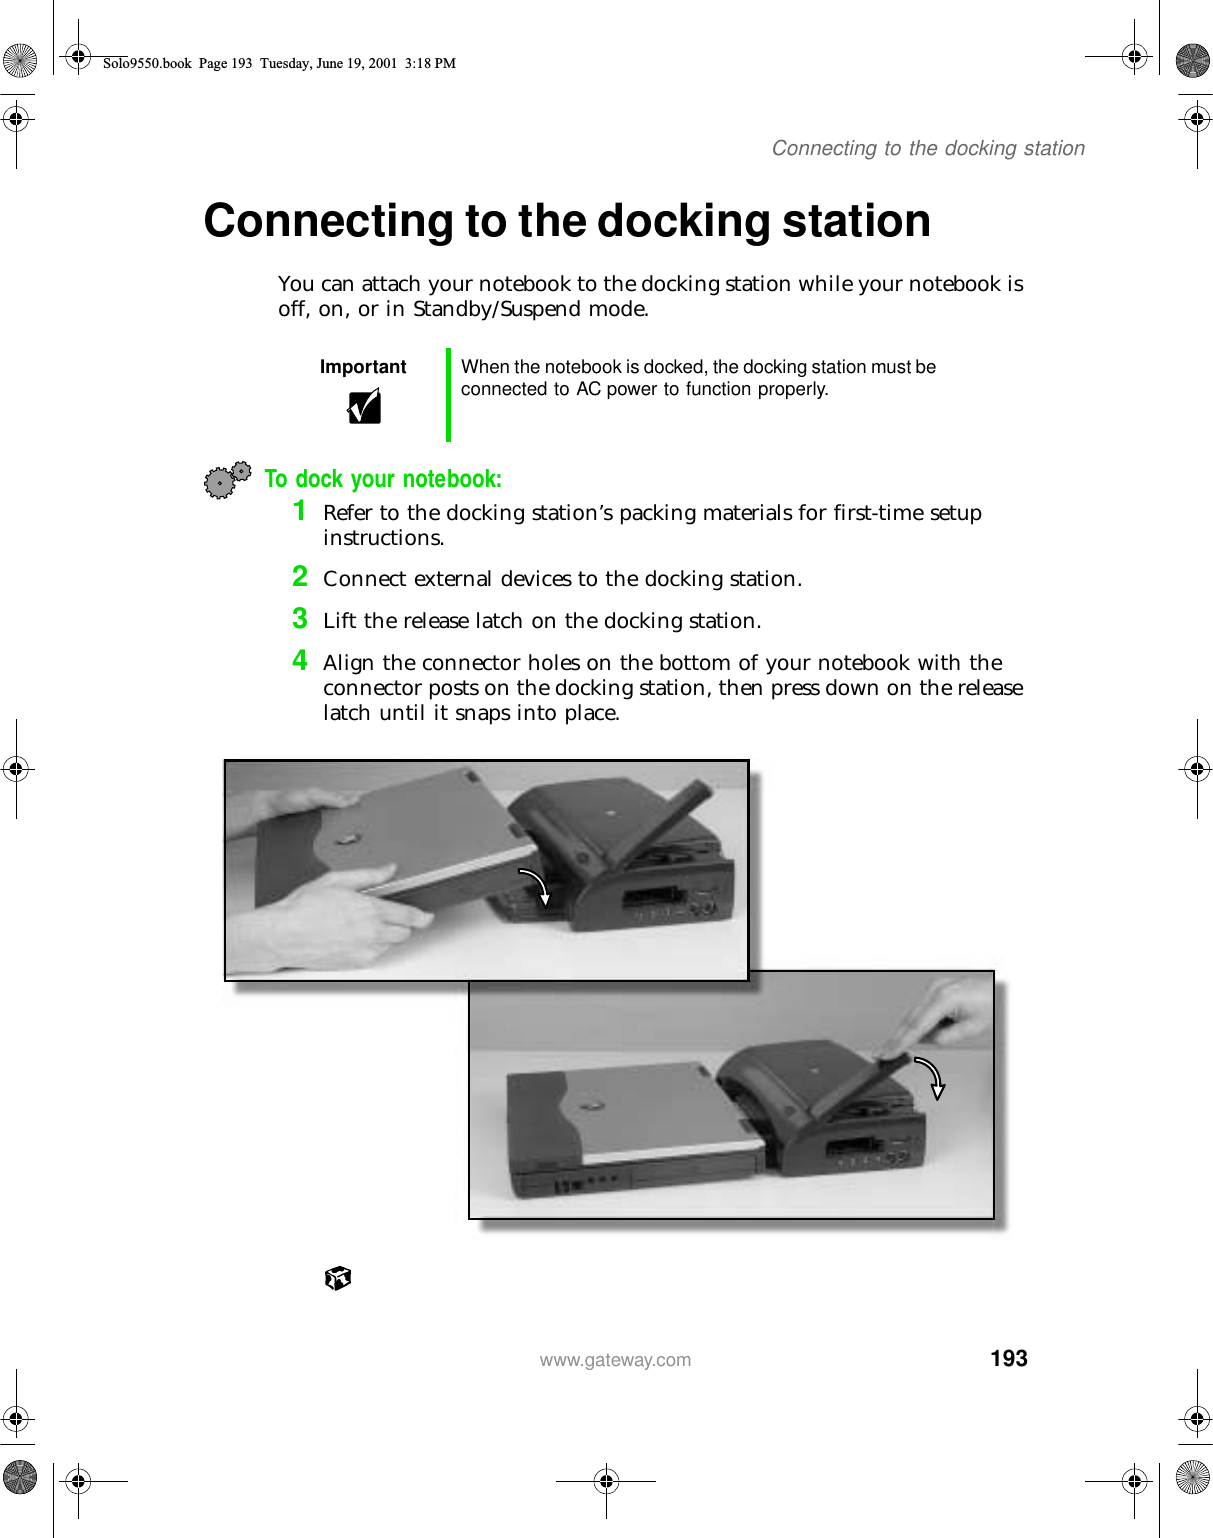 193Connecting to the docking stationwww.gateway.comConnecting to the docking stationYou can attach your notebook to the docking station while your notebook is off, on, or in Standby/Suspend mode.To dock your notebook:1Refer to the docking station’s packing materials for first-time setup instructions.2Connect external devices to the docking station.3Lift the release latch on the docking station.4Align the connector holes on the bottom of your notebook with the connector posts on the docking station, then press down on the release latch until it snaps into place.Important When the notebook is docked, the docking station must be connected to AC power to function properly.Solo9550.book Page 193 Tuesday, June 19, 2001 3:18 PM